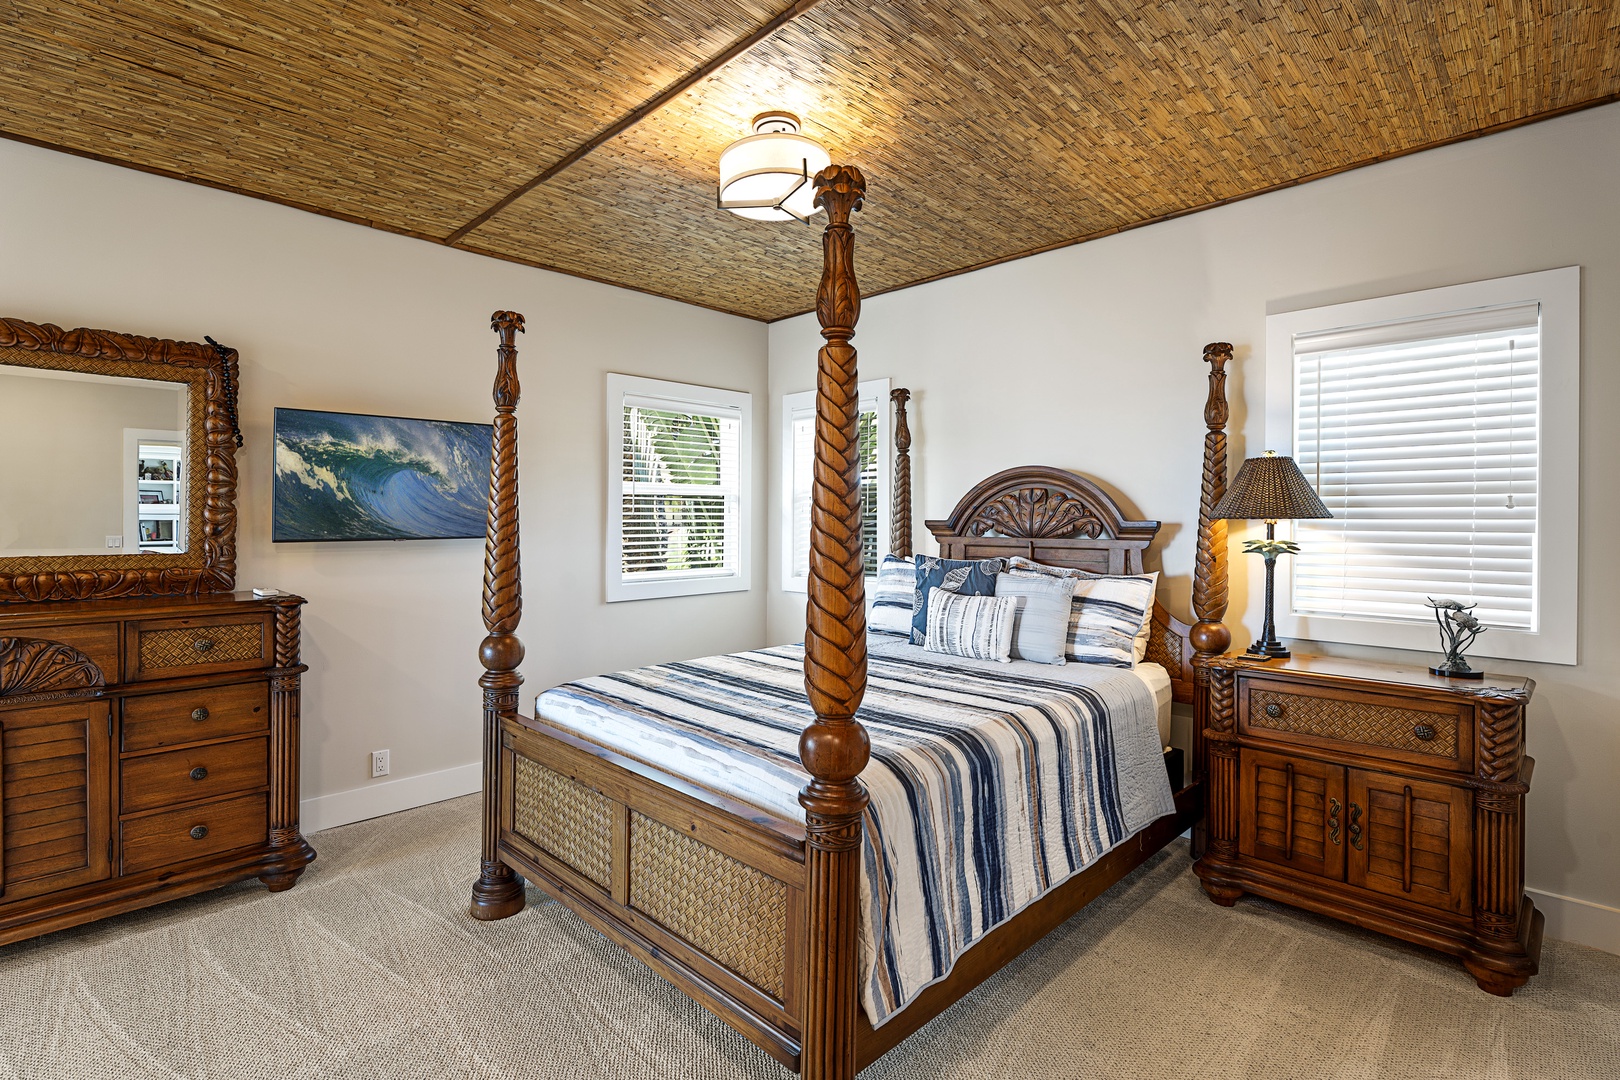 Kailua Kona Vacation Rentals, Ali'i Point #7 - The second queen bedroom is also located upstairs and has its own bath and a small private lanai